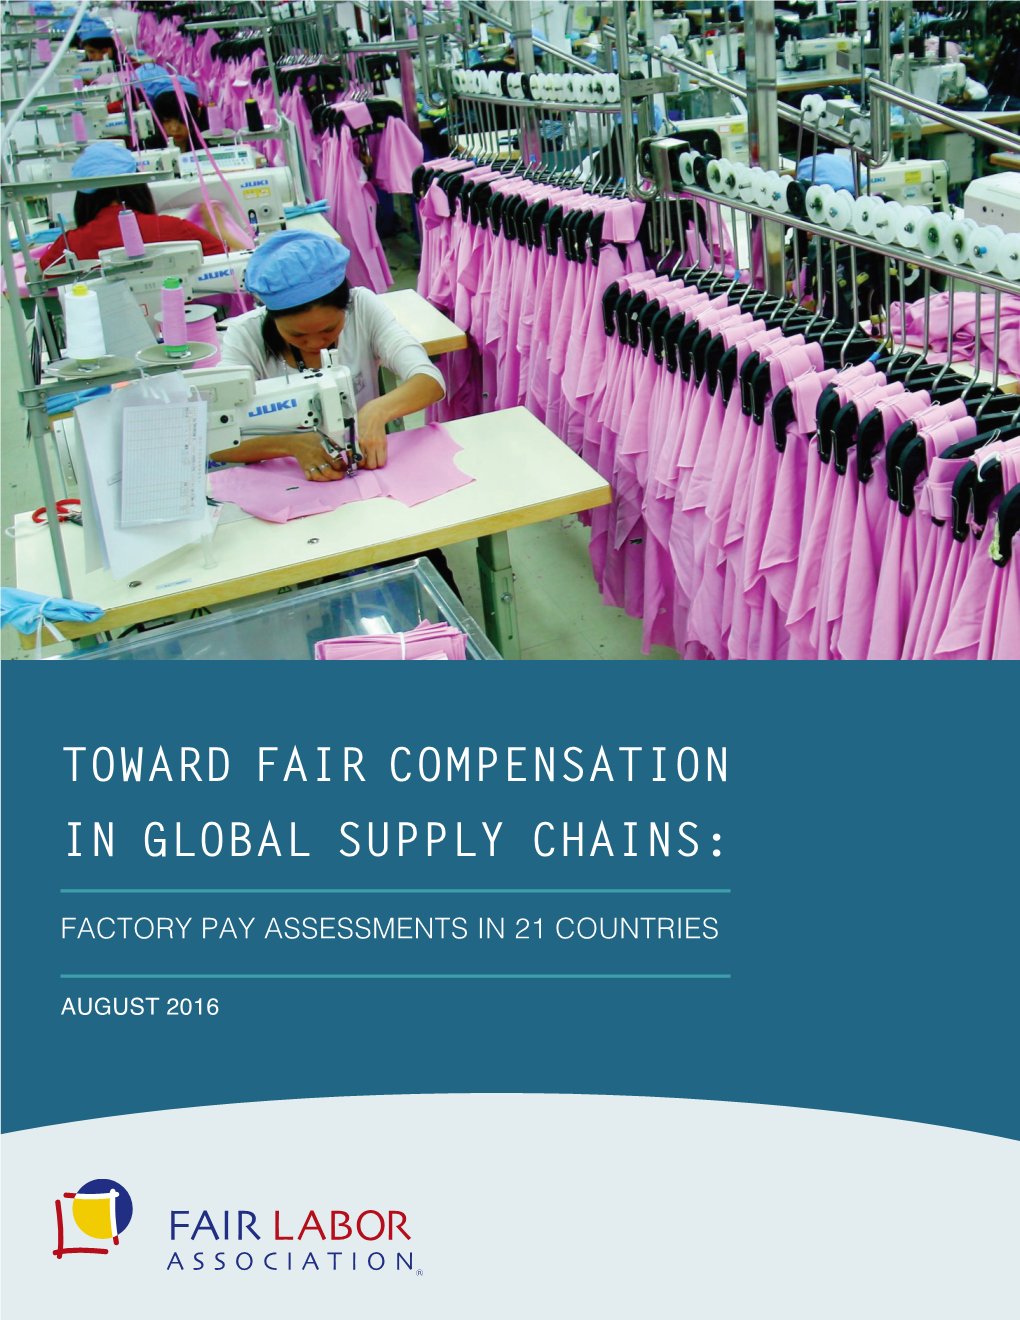 Toward Fair Compensation in Global Supply Chains